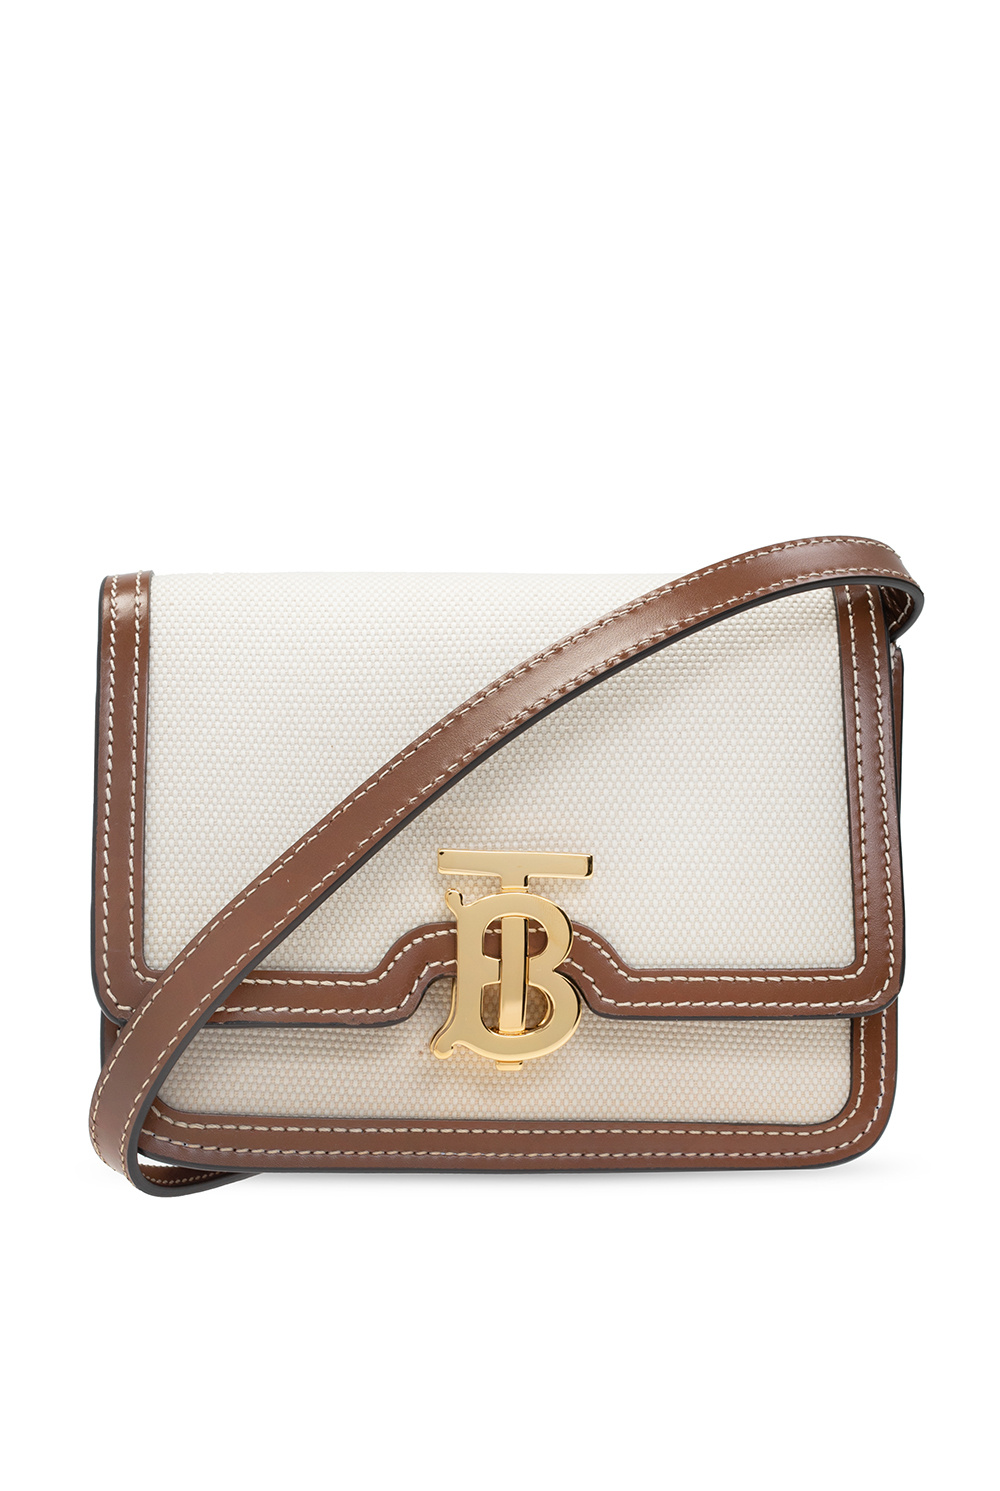 Burberry The Bridle Bag In Leather And Haymarket Check Natural